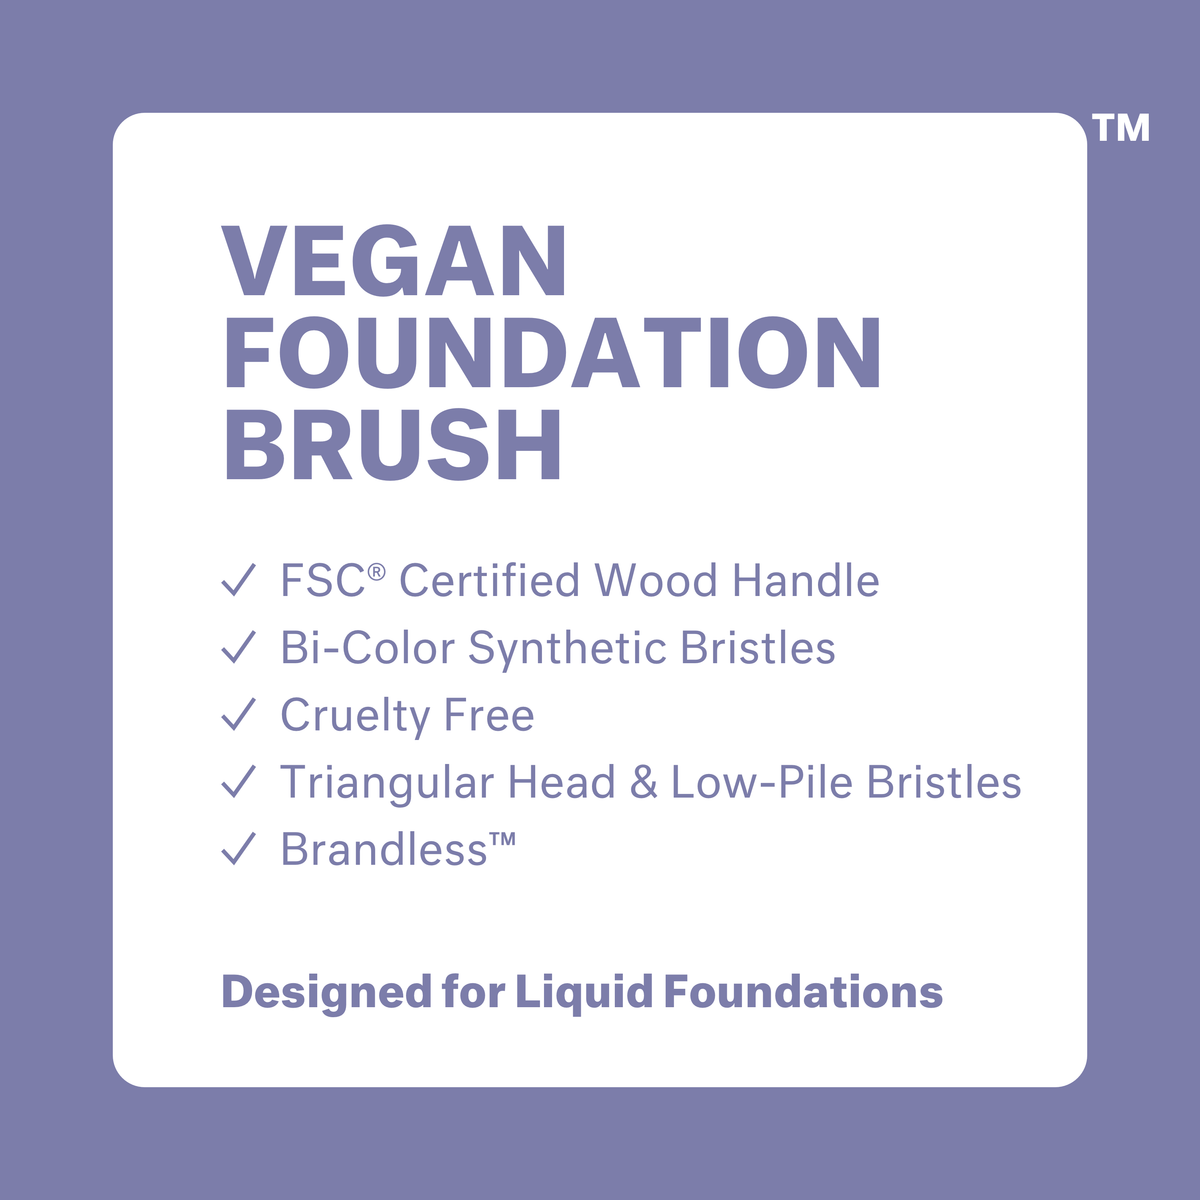 Vegan Foundation Brush: FSC certified wood handle, bi-color synthetic bristles, cruelty free, triangular head and low-pile bristles, brandless. Designed for liquid foundations.